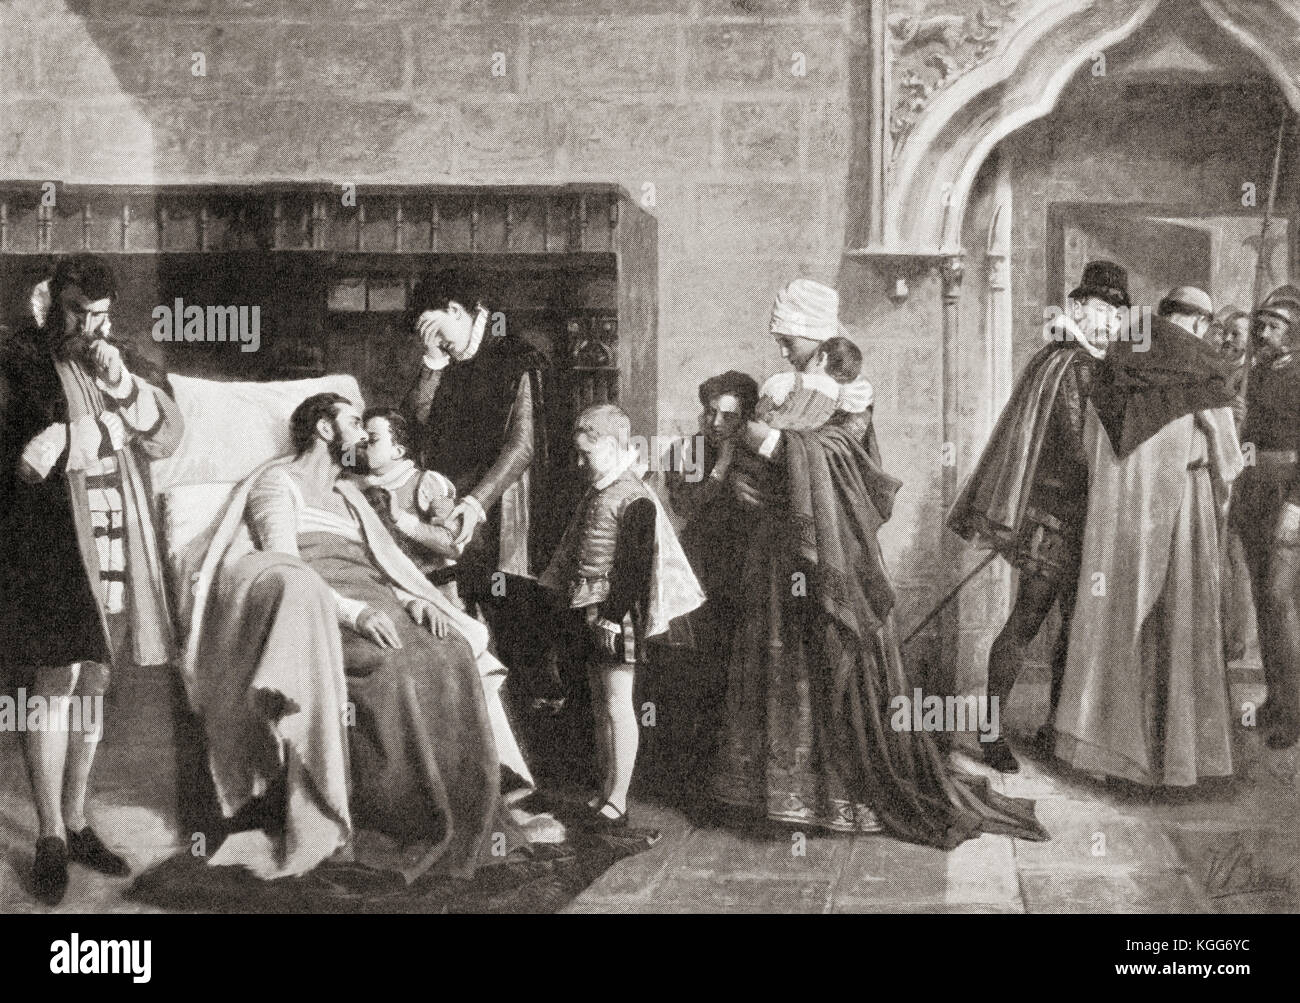 Antonio Pérez, 1540–1611.  Spanish statesman, secretary of king Philip II of Spain, said to have organised the murder of Juan de Escobedo. He is seen here being visited in prison by his family in 1589.  From Hutchinson's History of the Nations, published 1915. Stock Photo